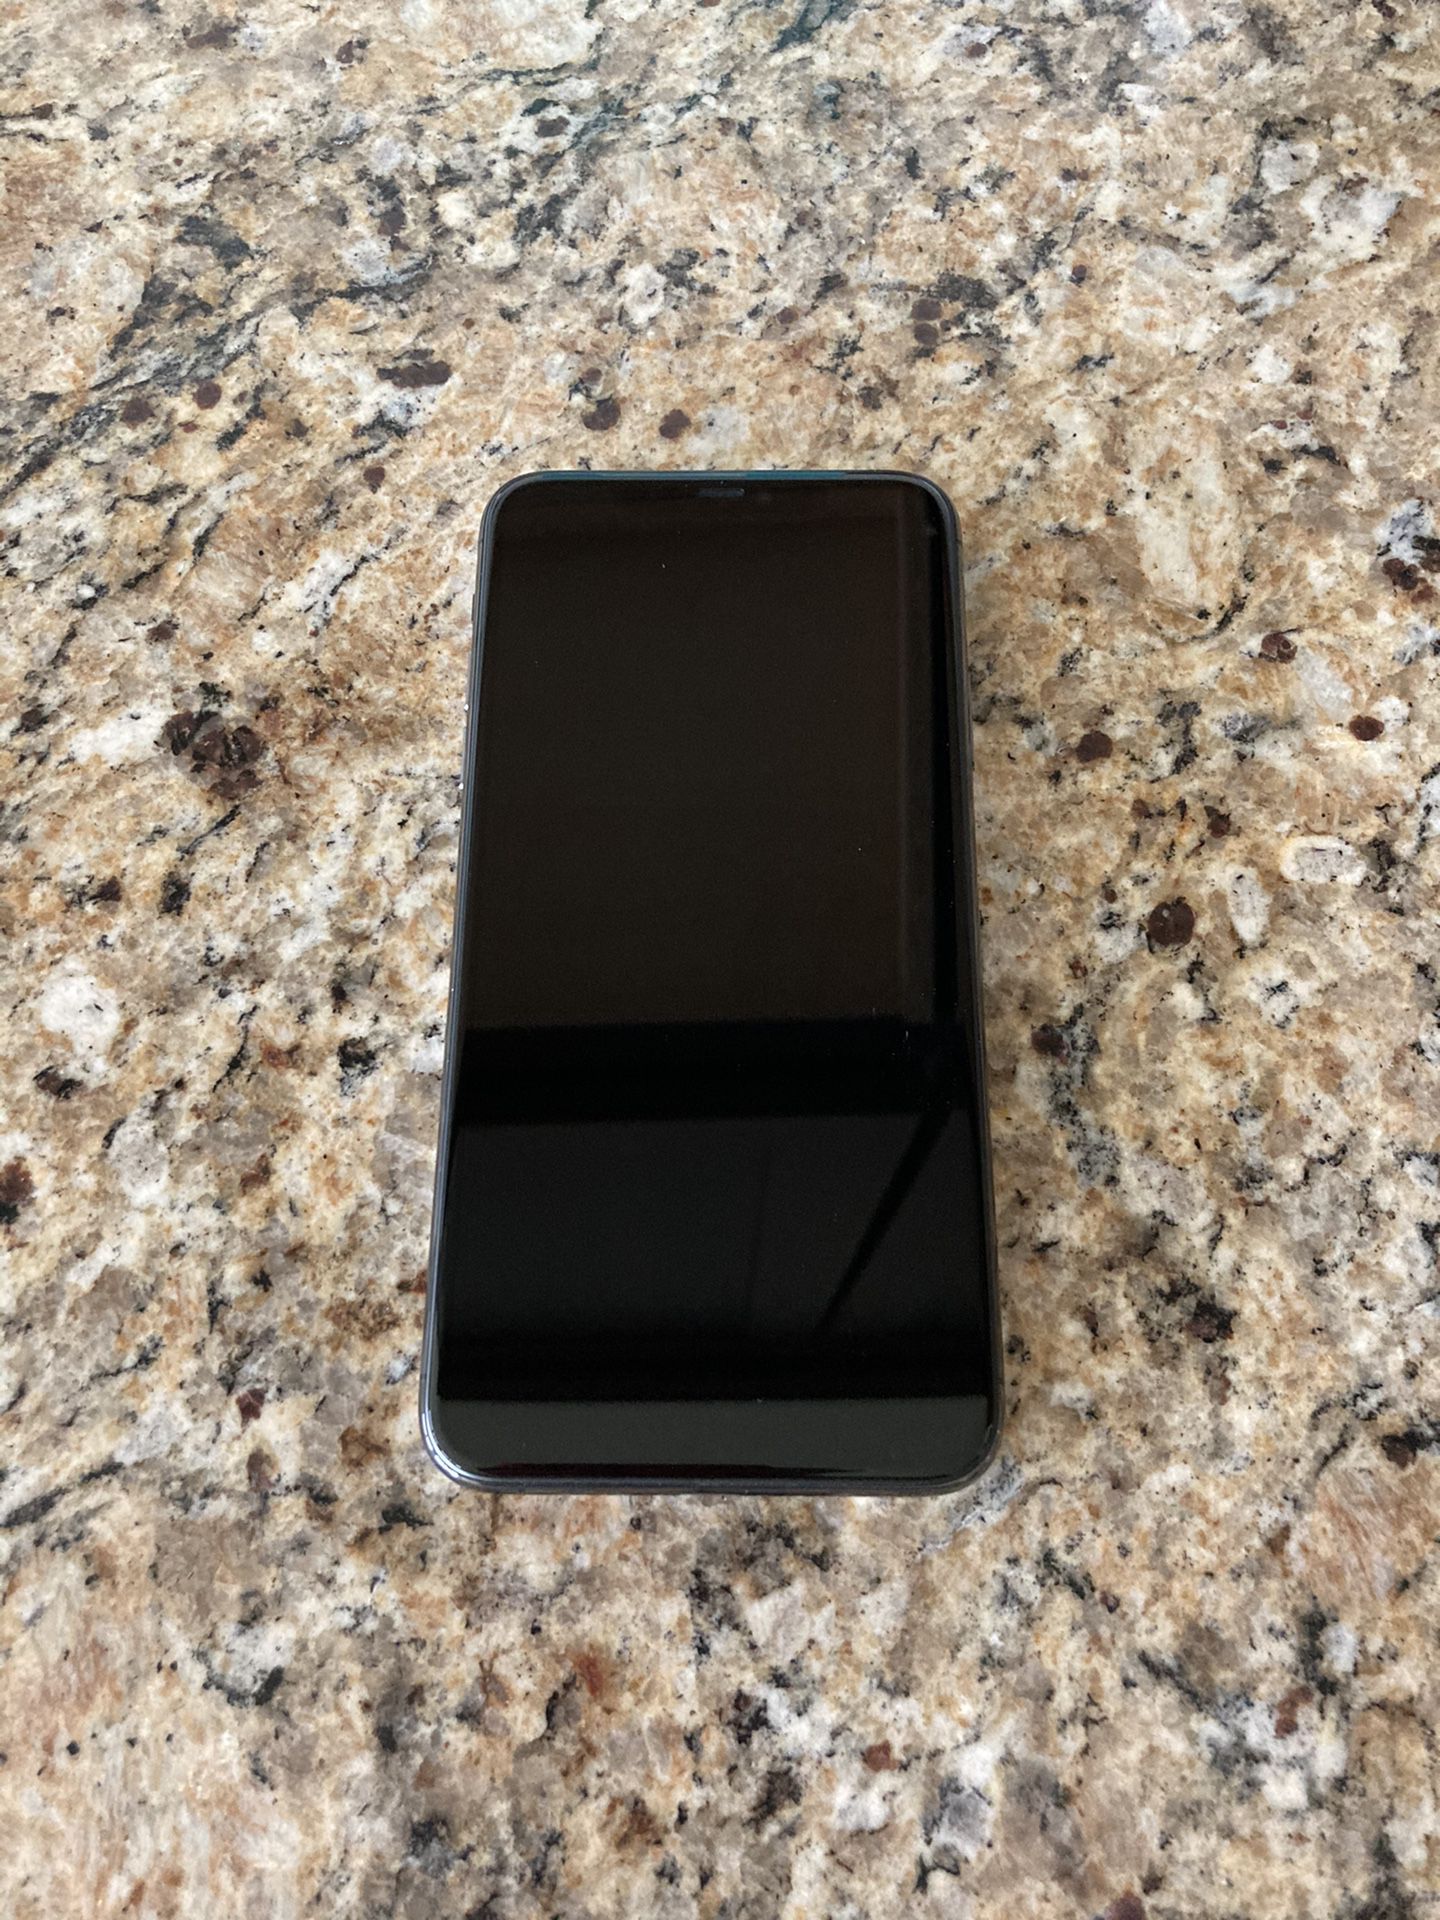 iPhone 11 Pro Max 64gb space grey